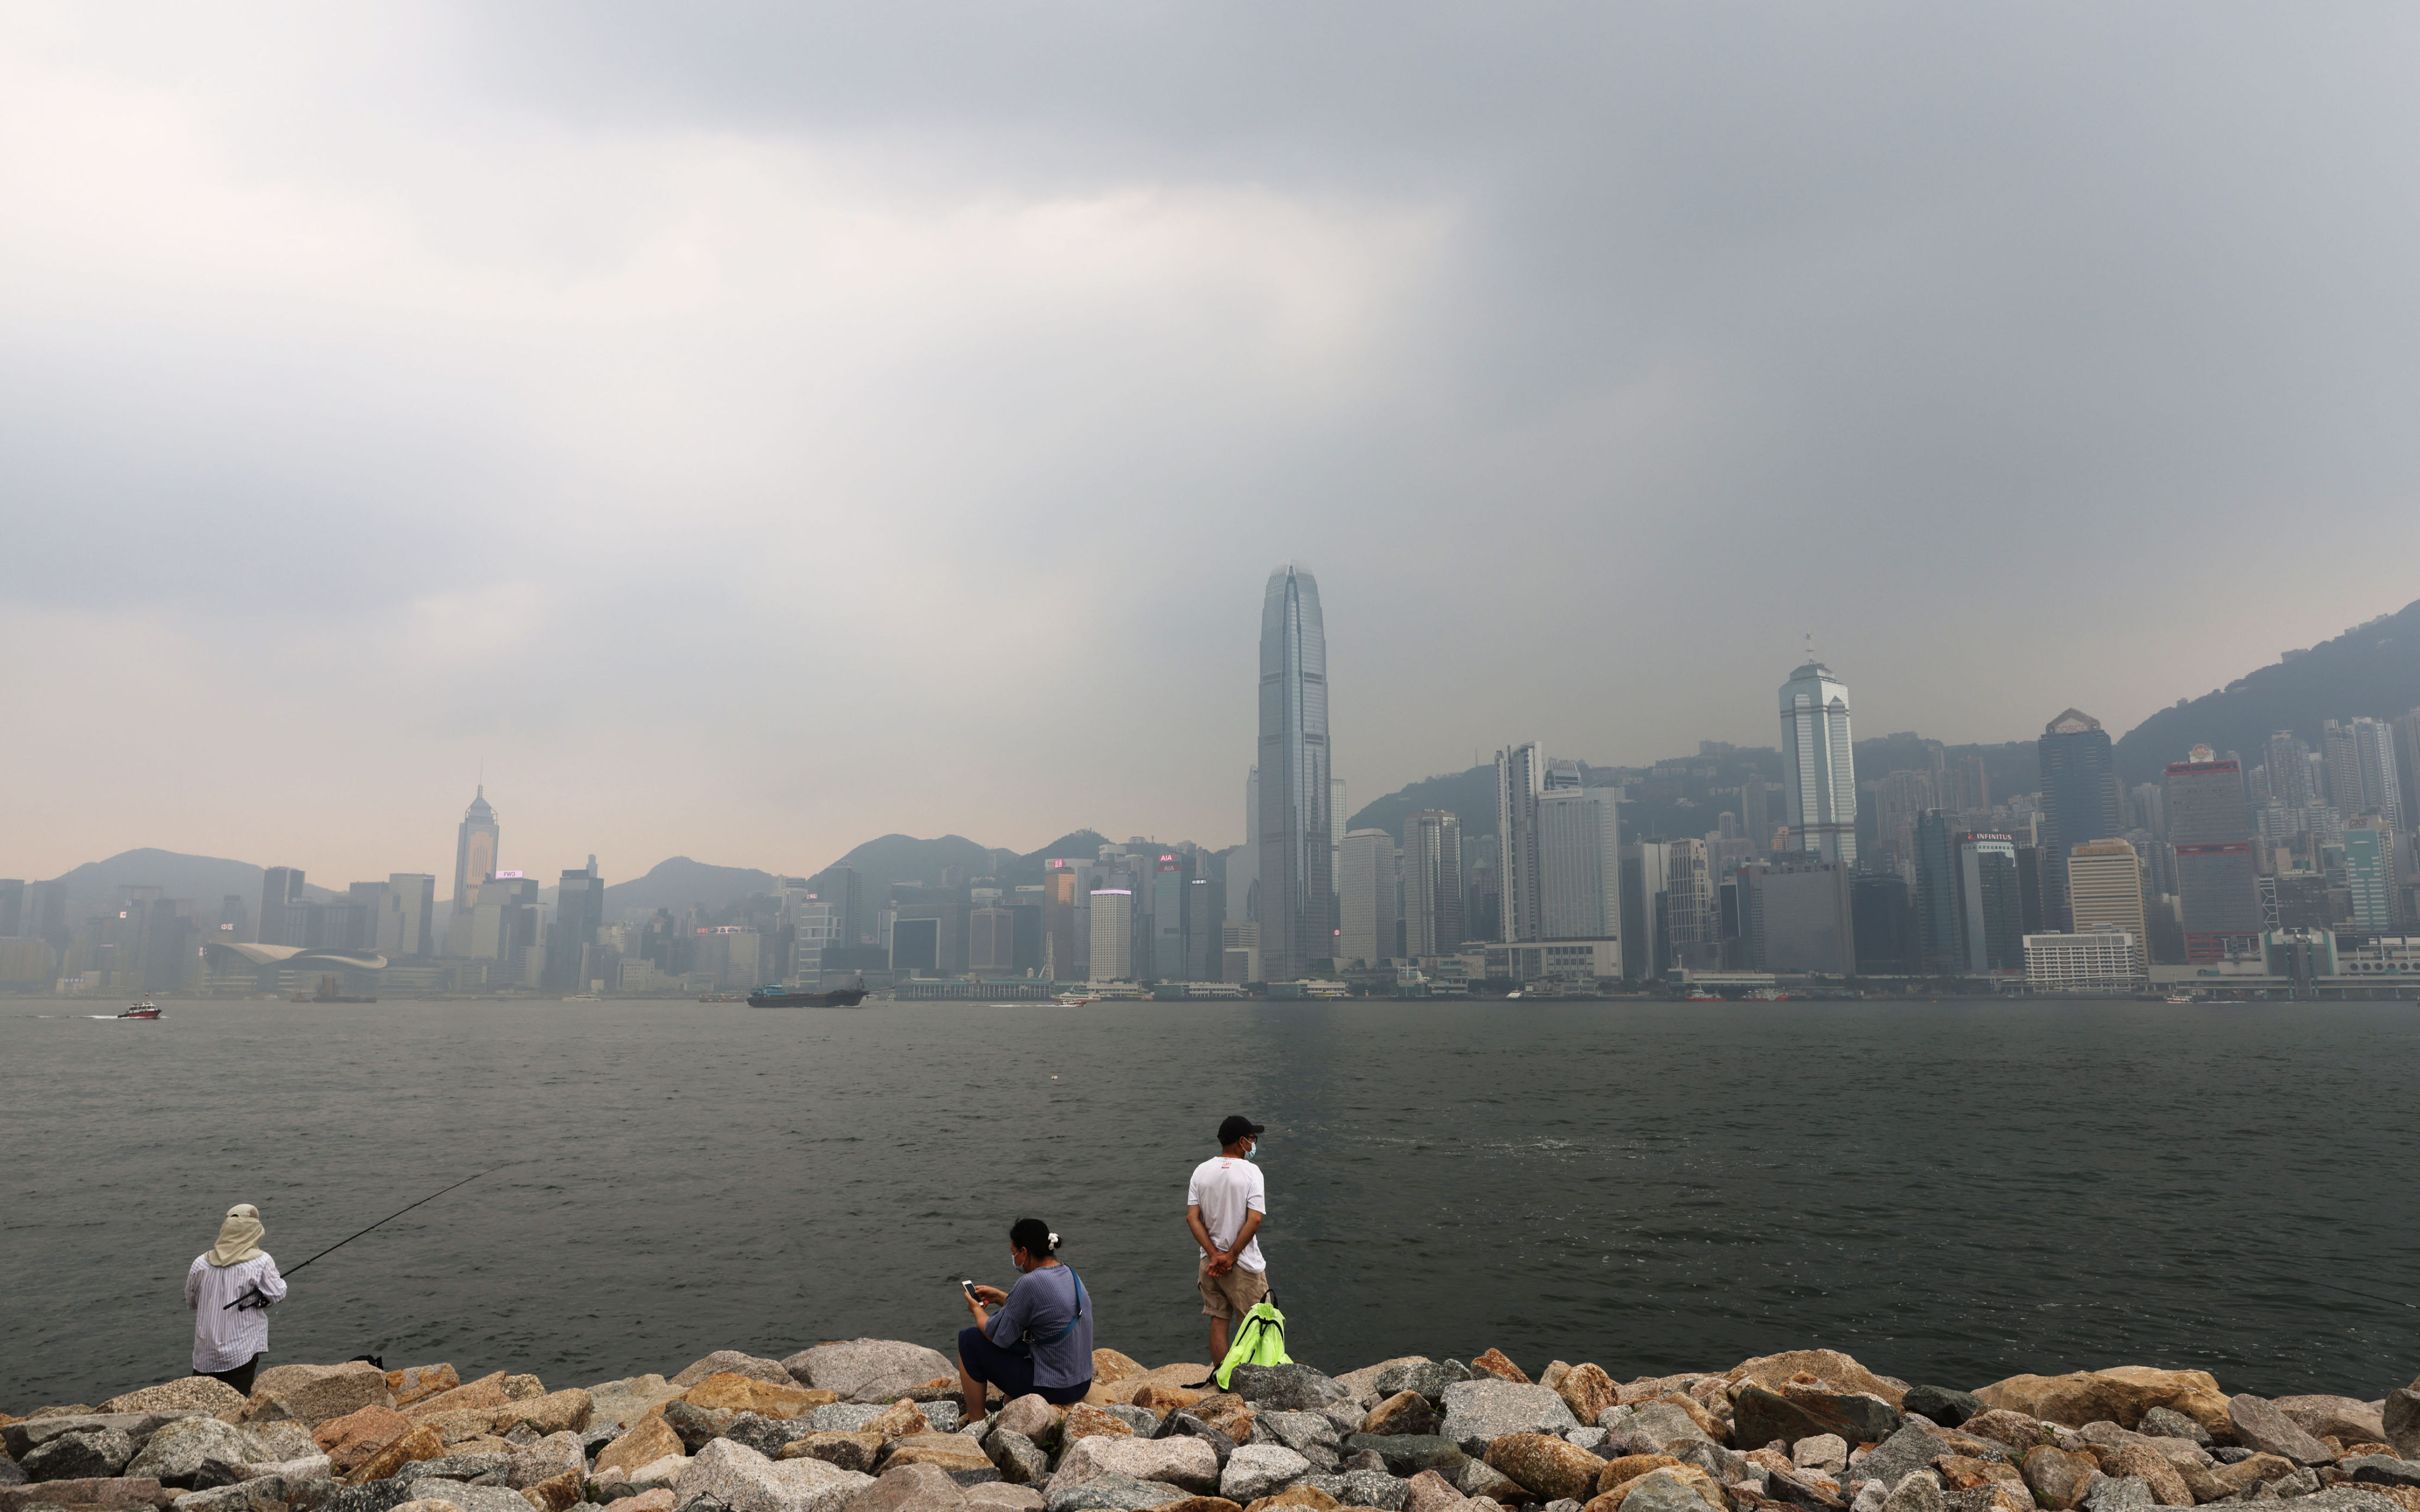 People look towards Hong Kong Island from the waterfront at the West Kowloon Cultural District as air pollution hangs over the city. Photo: May Tse